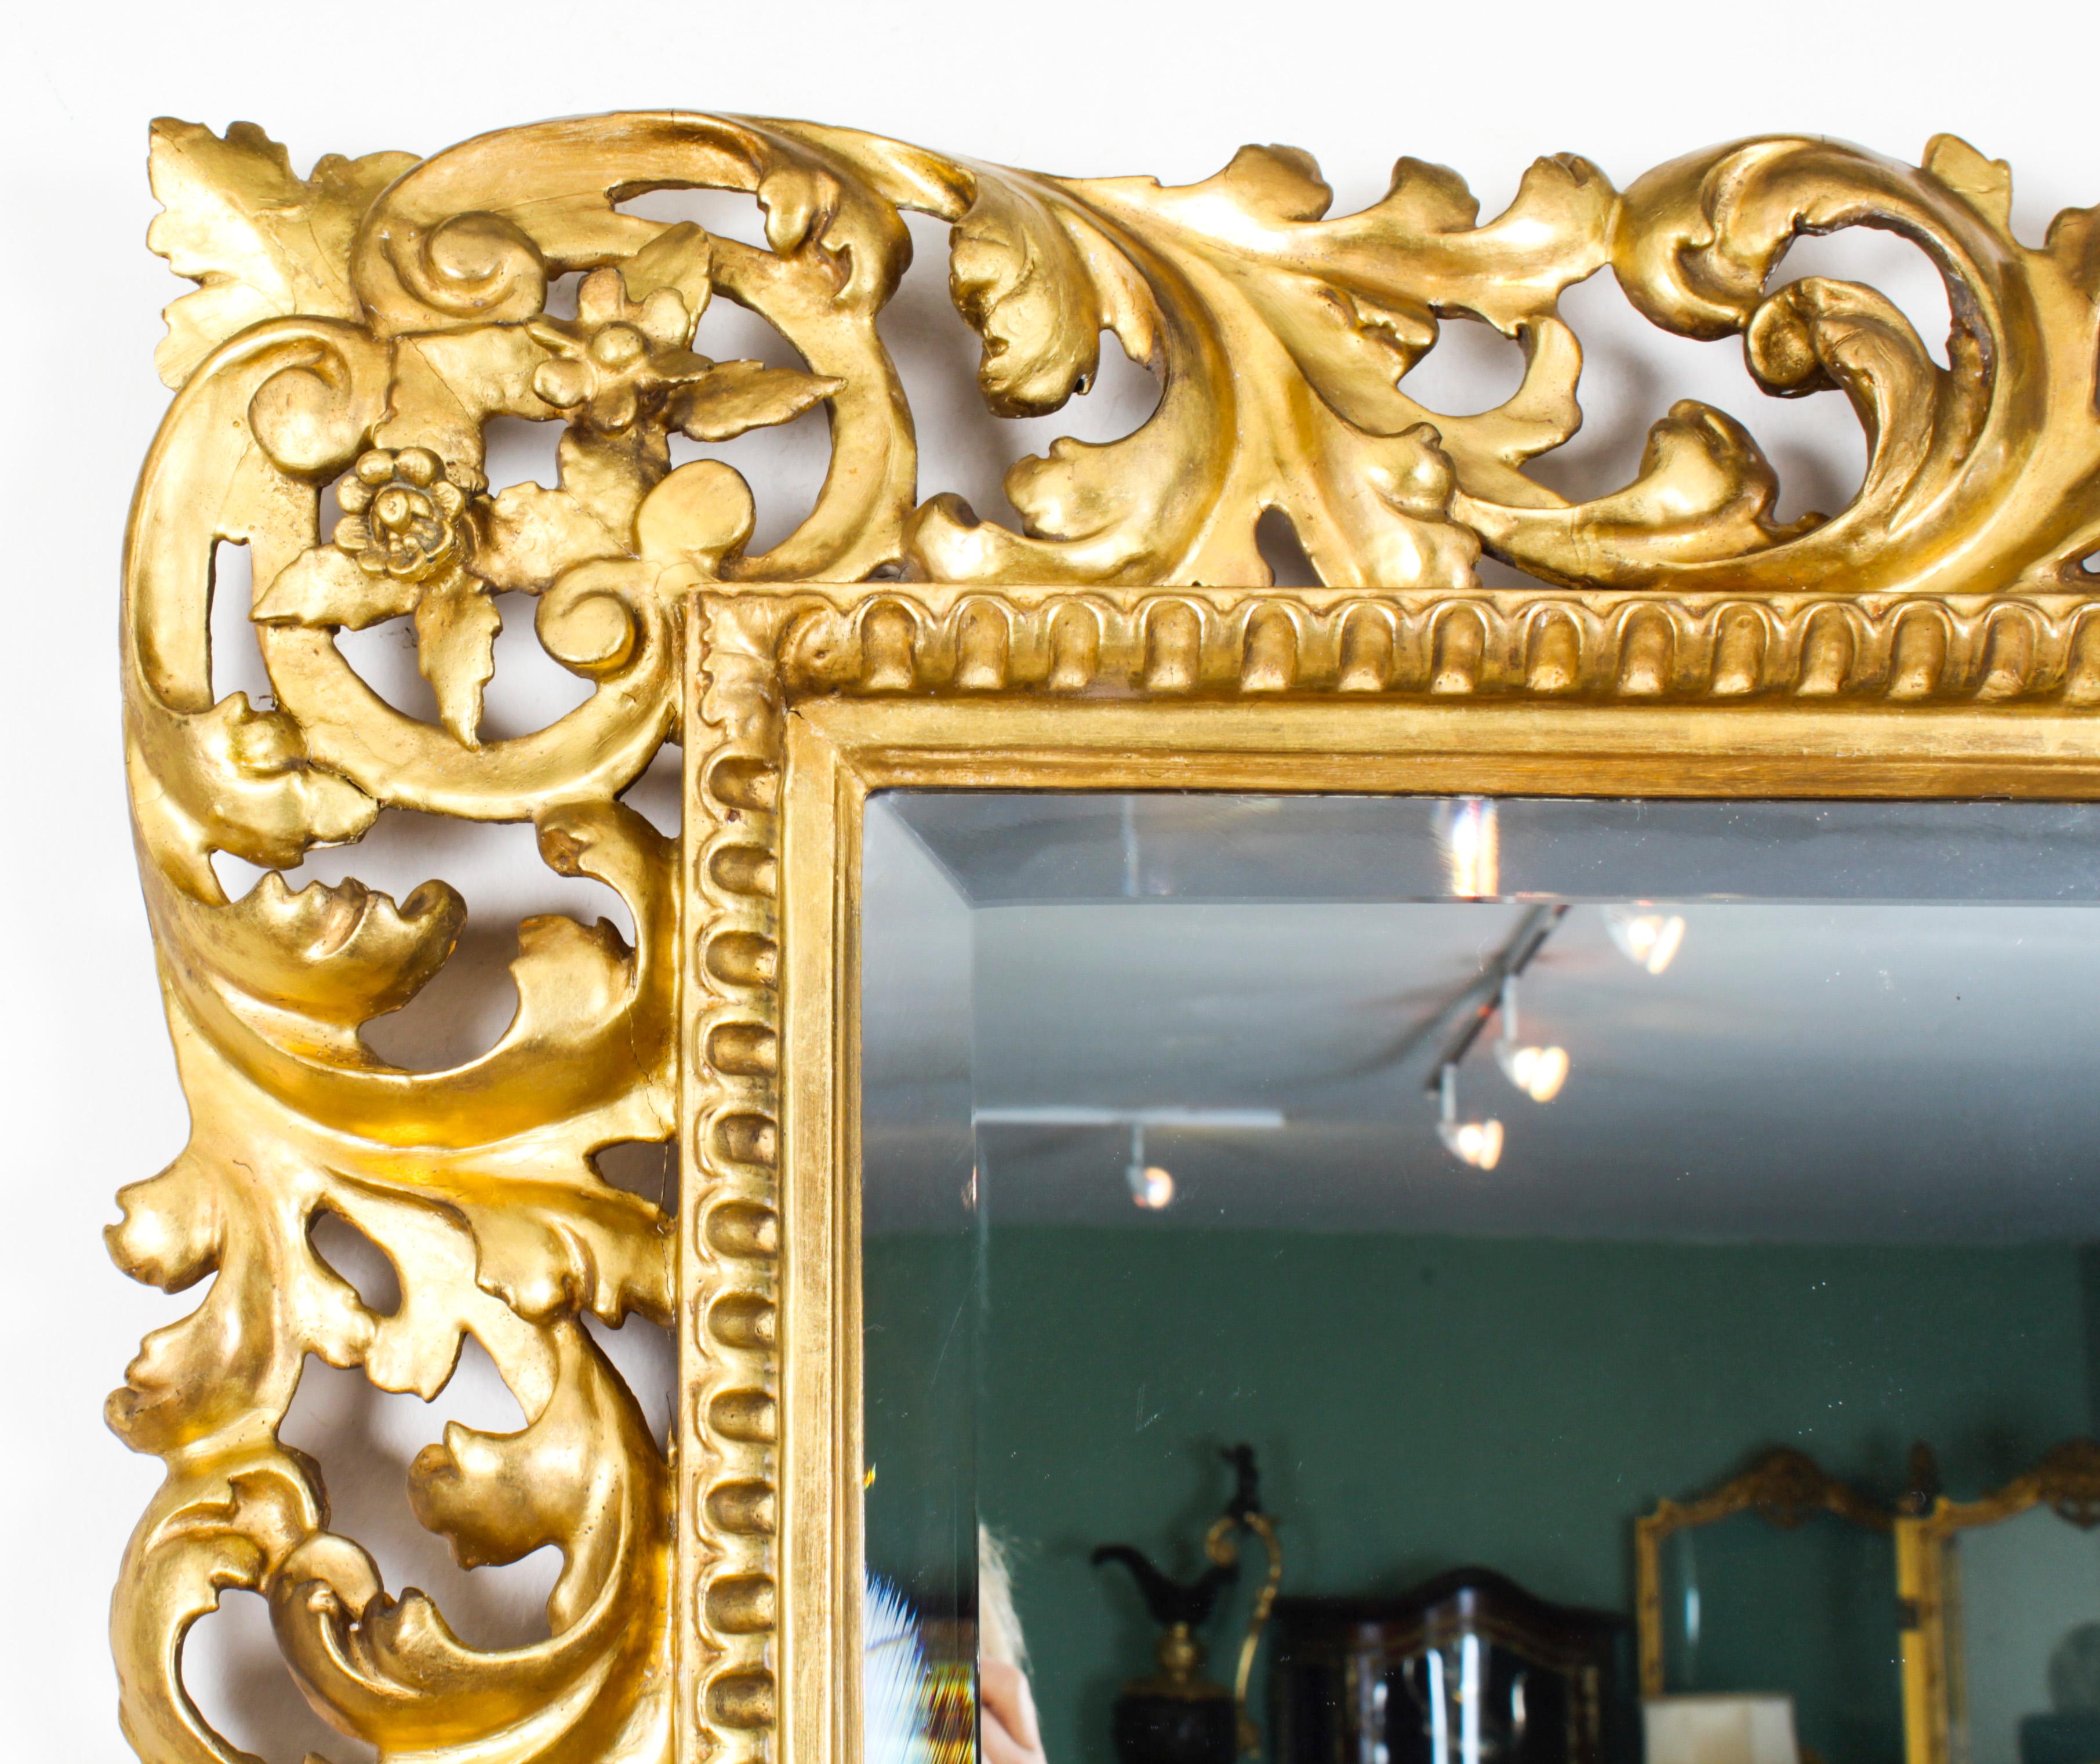 A superbly carved and highly decorative Florentine giltwood mirror, dating from Circa 1880.
 
This rectangular mirror consists of a superbly carved giltwood frame decorated with flowers and scrolling acanthus leaf decoration in high relief.
 
This